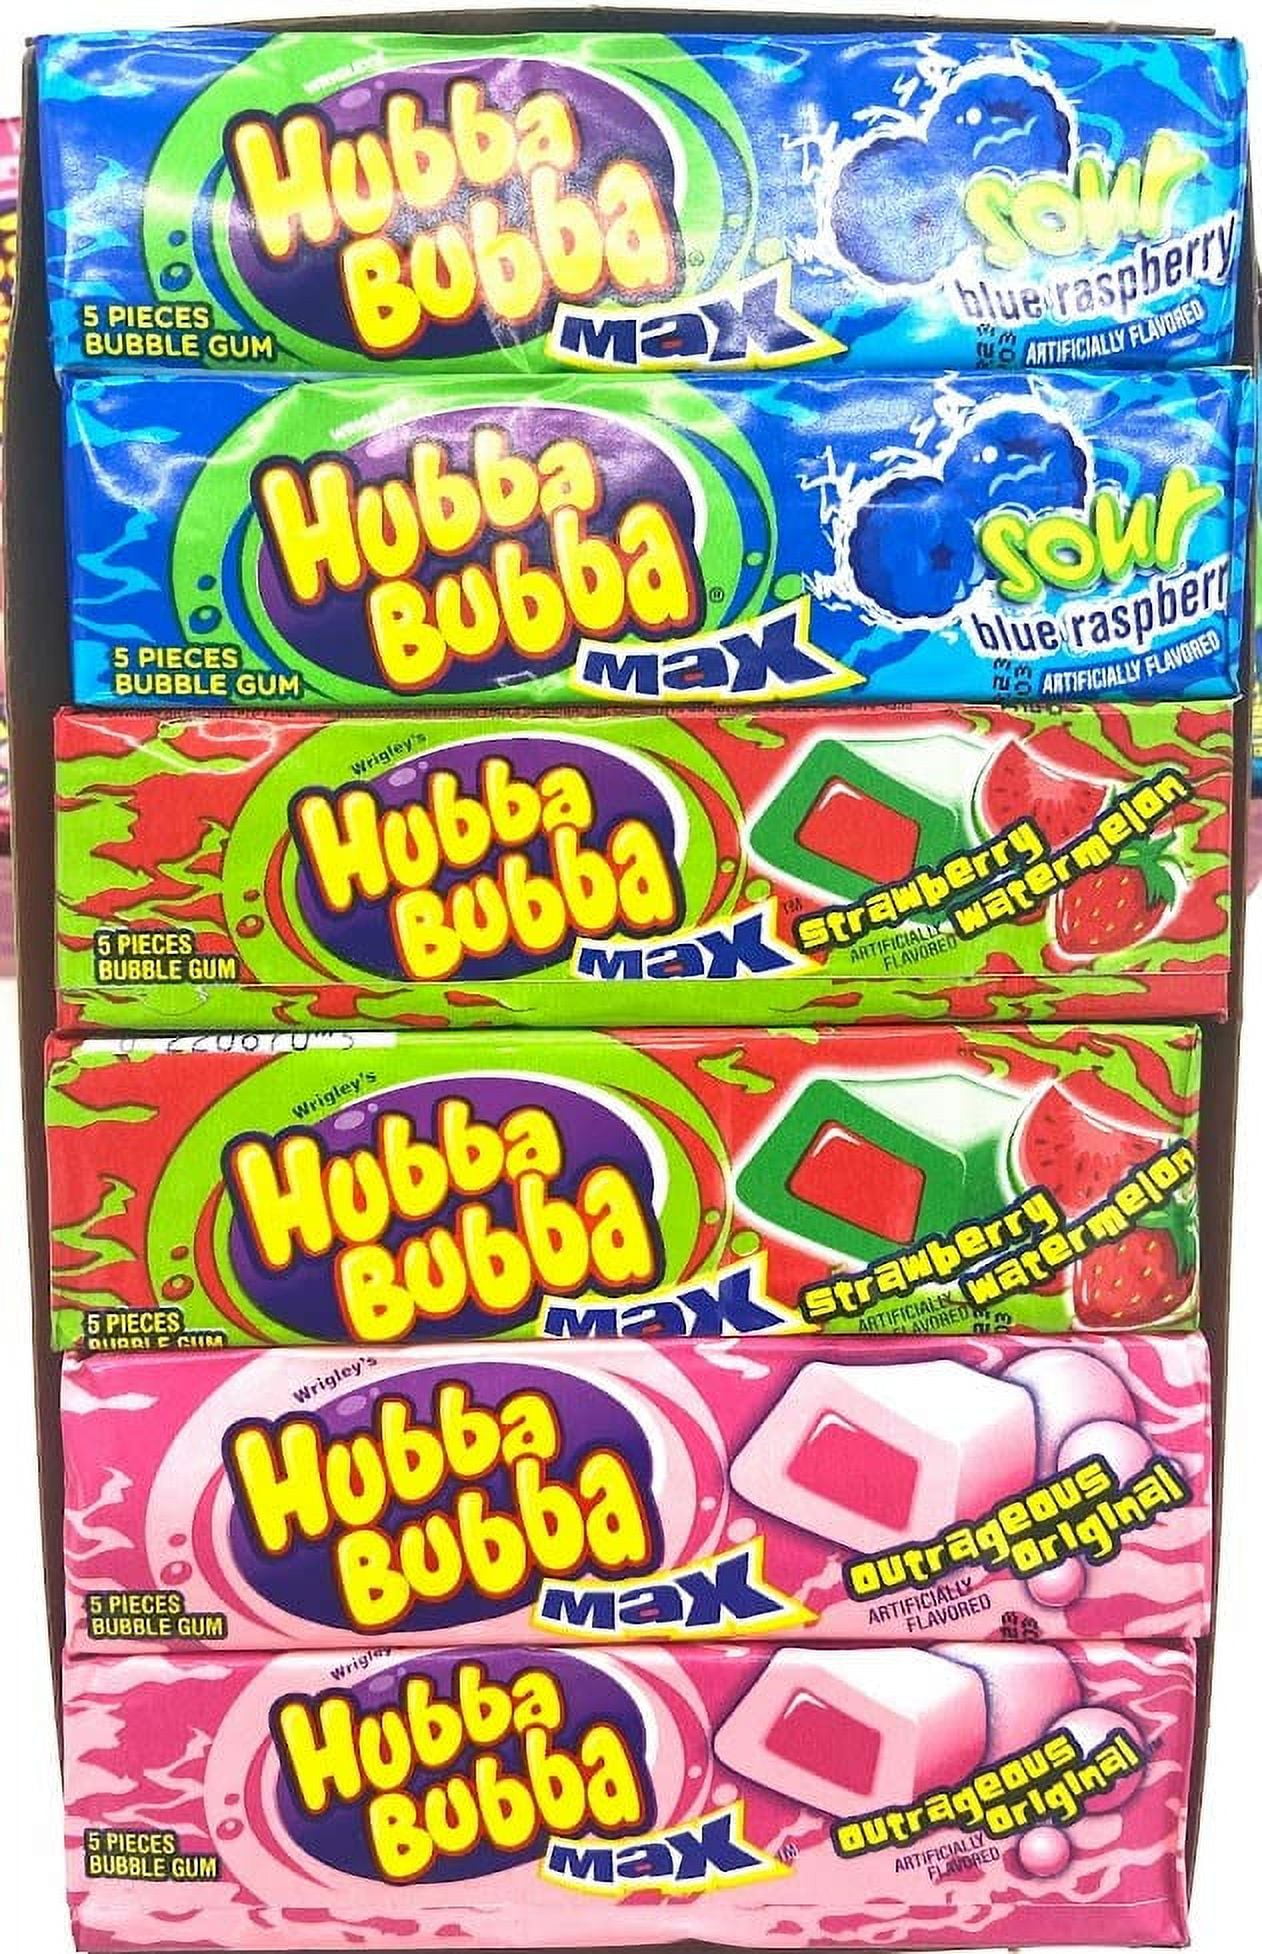 Hubba Bubba Max Outrageous Original Gum, 5 Count (Pack of 18)